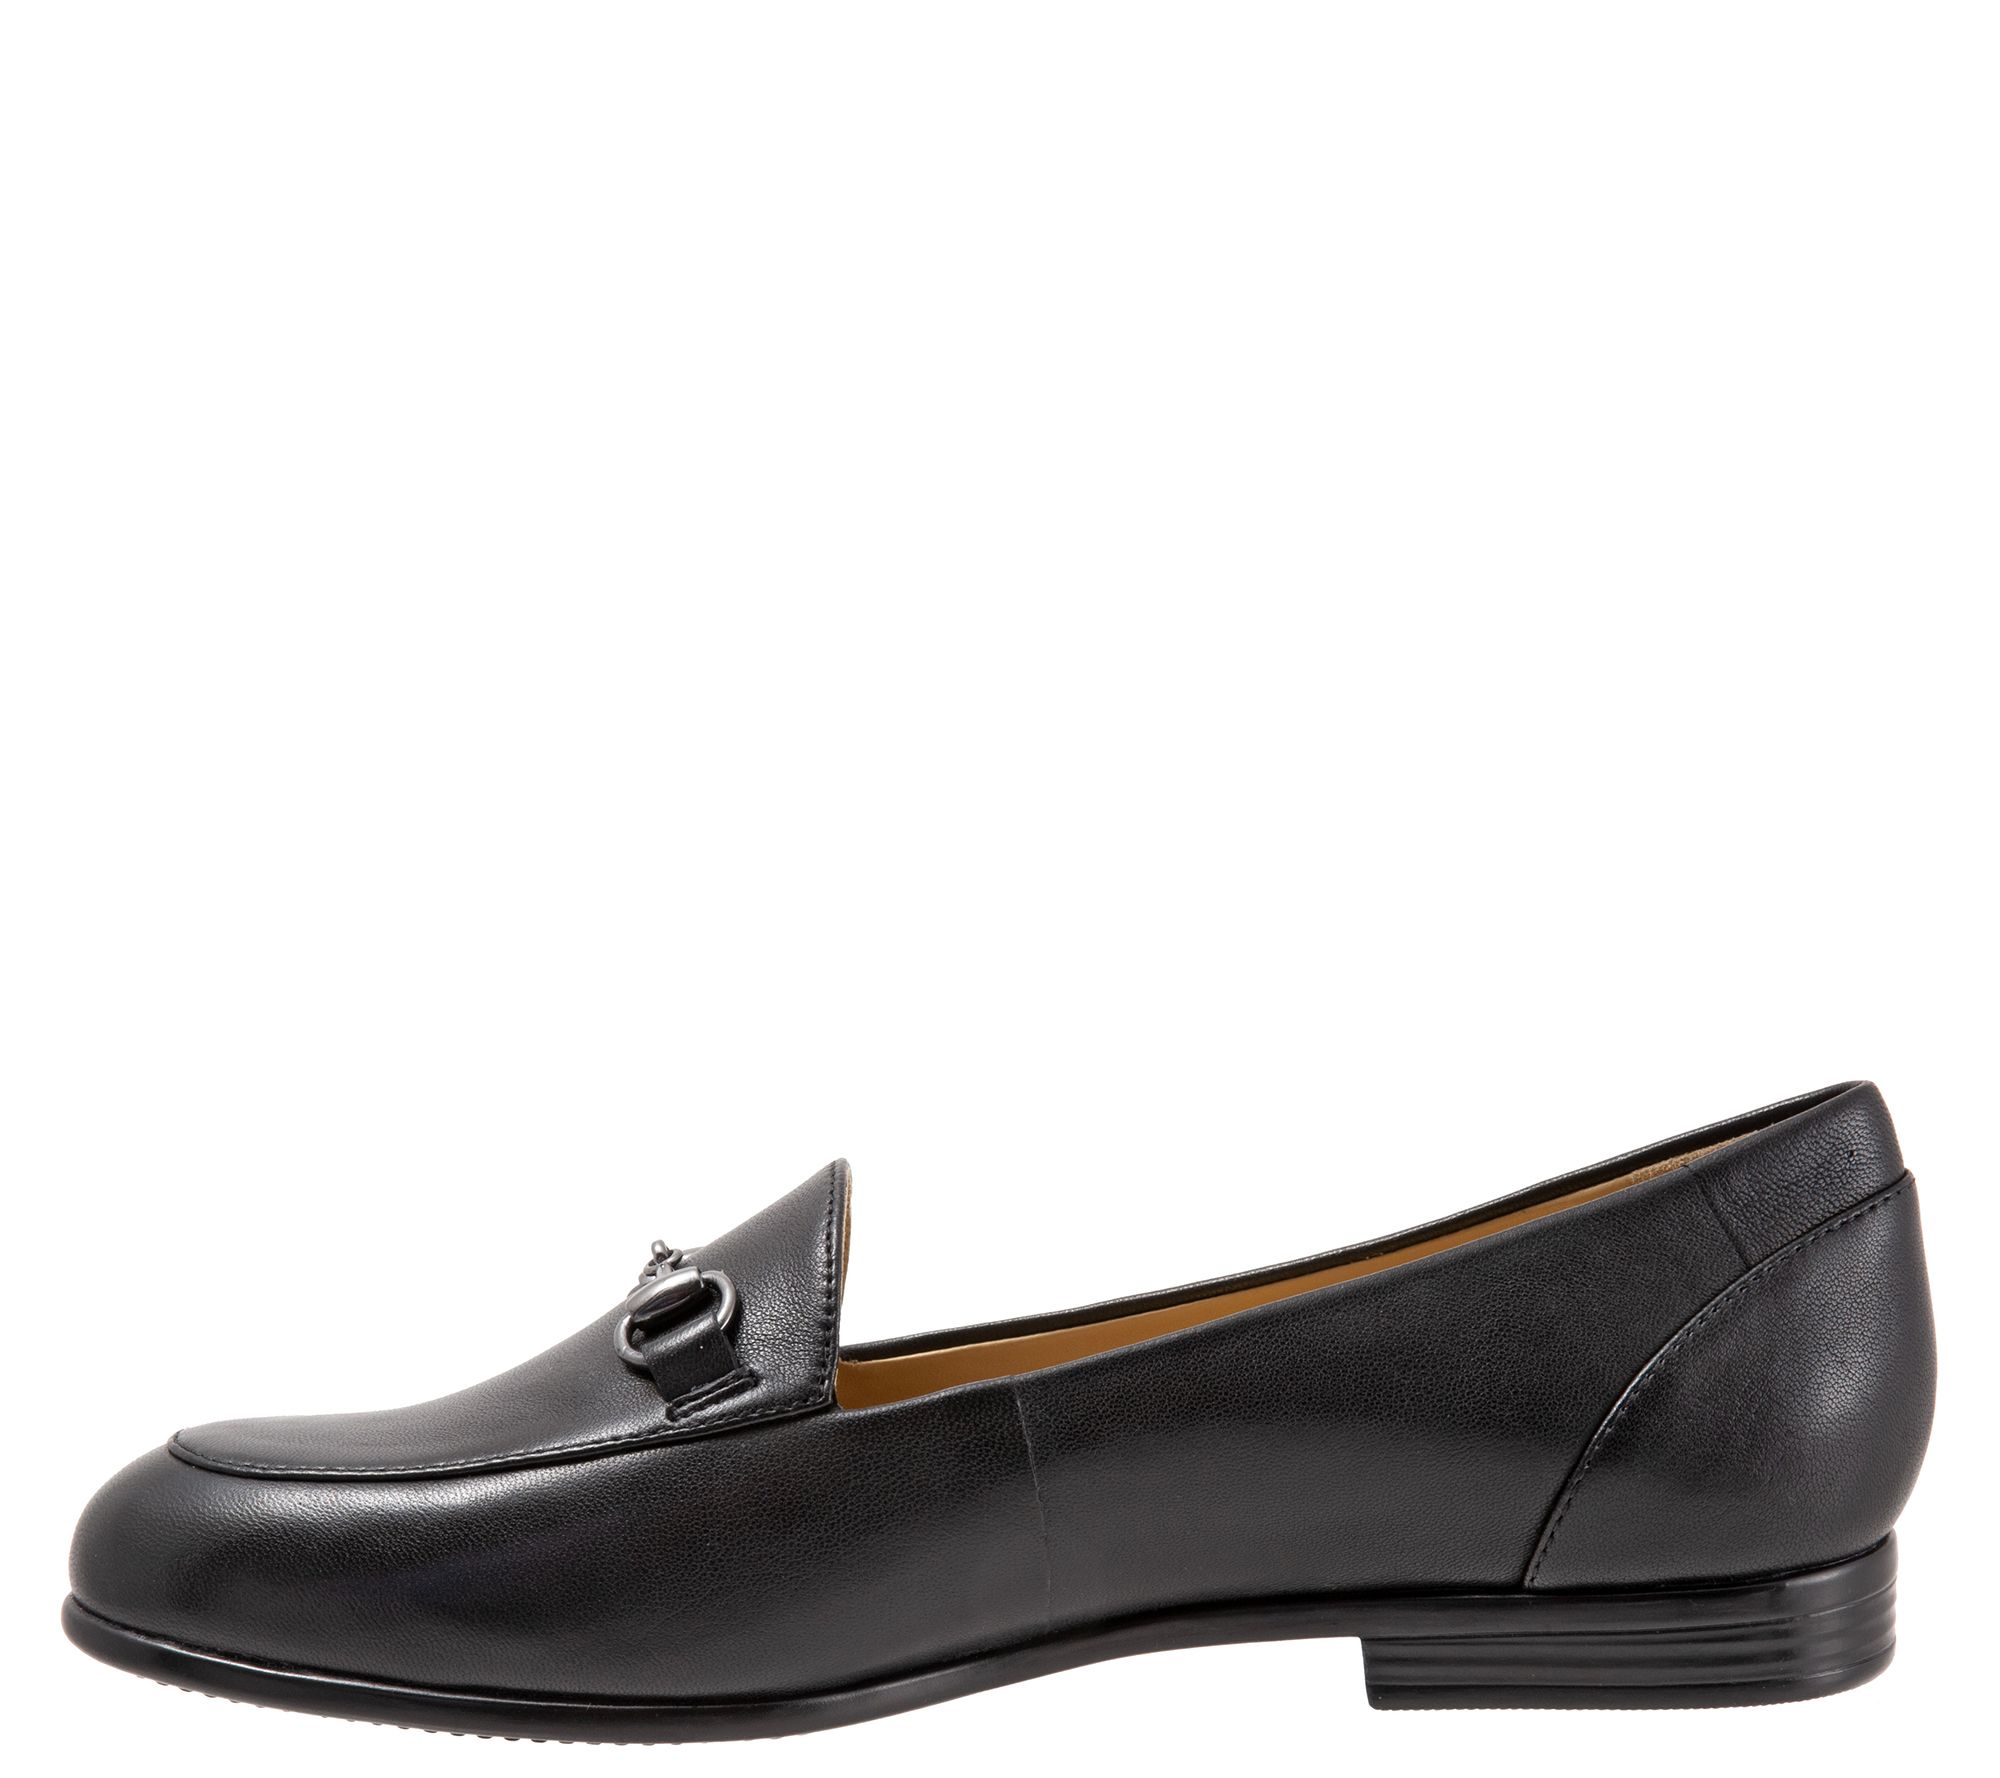 Trotters Sophisticated Leather Loafers - Anice - QVC.com